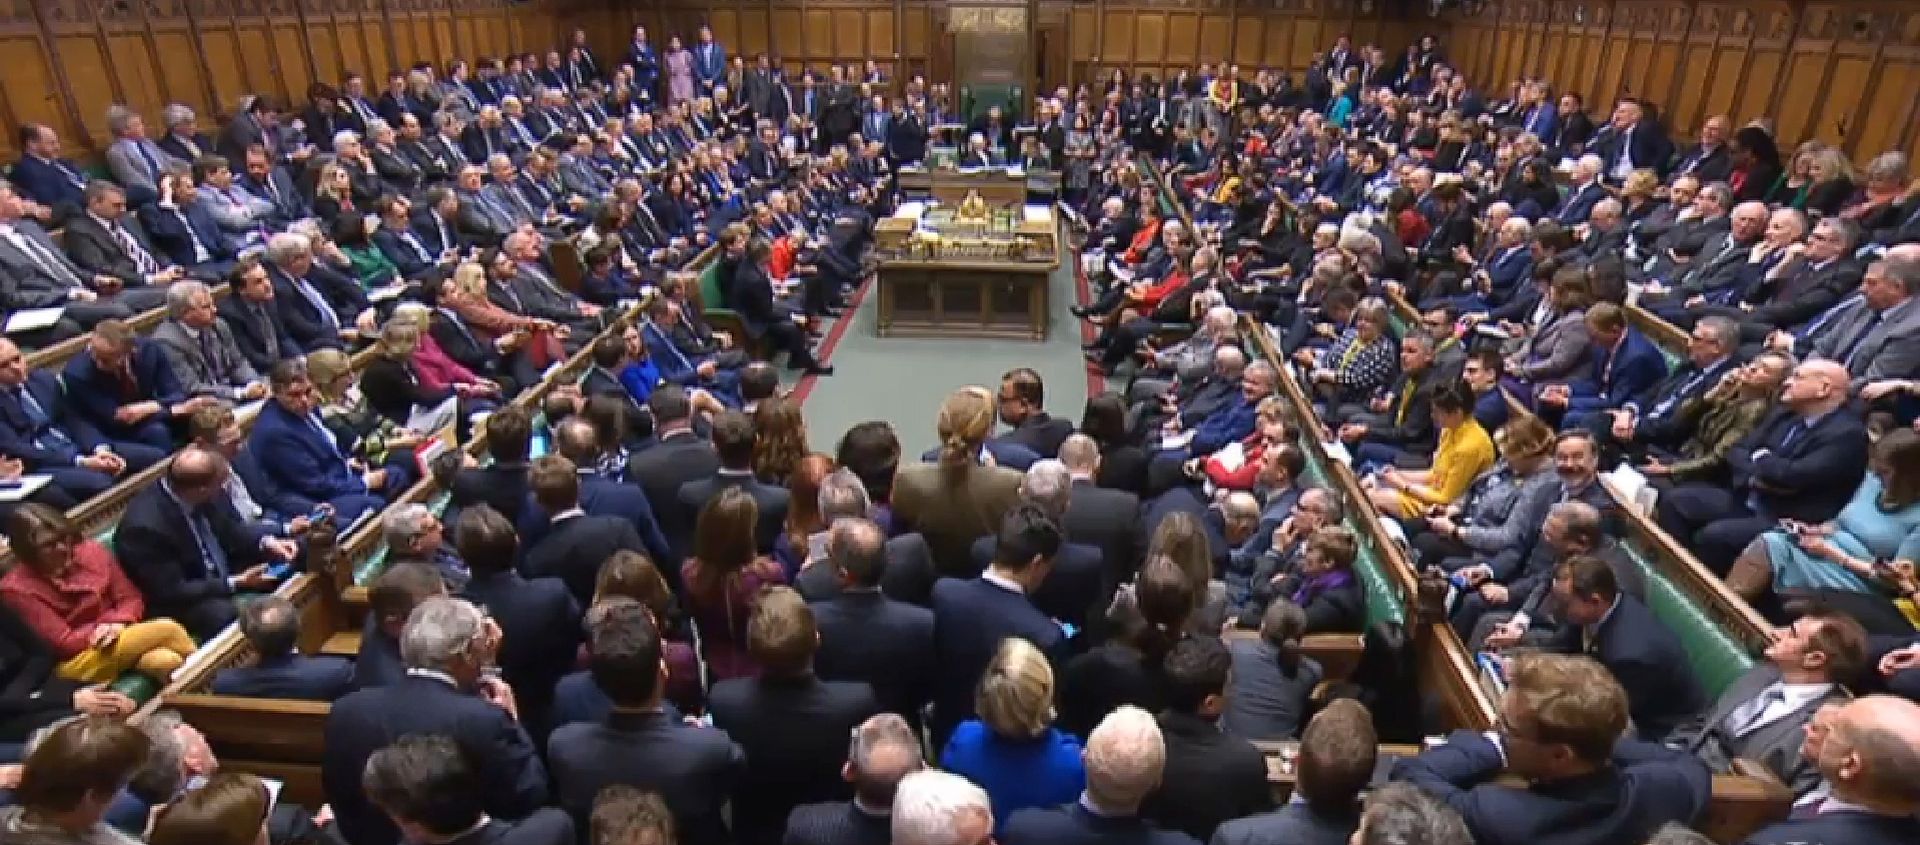 epa07432020 A grab from a handout video made available by the UK Parliamentary Recording Unit shows Members of Parliament after voting at the House of Commons parliament in London, Britain, 12 March 2019 on British Prime Minister May's amended Brexit. Theresa May wants parliament to back her 'improved' withdrawalk agreement she has negotiated with the EU over the so-called 'backstop'. The United Kingdom is officially due to leave the European Union on 29 March 2019, two years after triggering Article 50 in consequence to a referendum.  EPA/UK PARLIAMENTARY RECORDING UNIT / HANDOUT MANDATORY CREDIT: UK PARLIAMENTARY RECORDING UNIT HANDOUT EDITORIAL USE ONLY/NO SALES HANDOUT EDITORIAL USE ONLY/NO SALES HANDOUT EDITORIAL USE ONLY/NO SALES